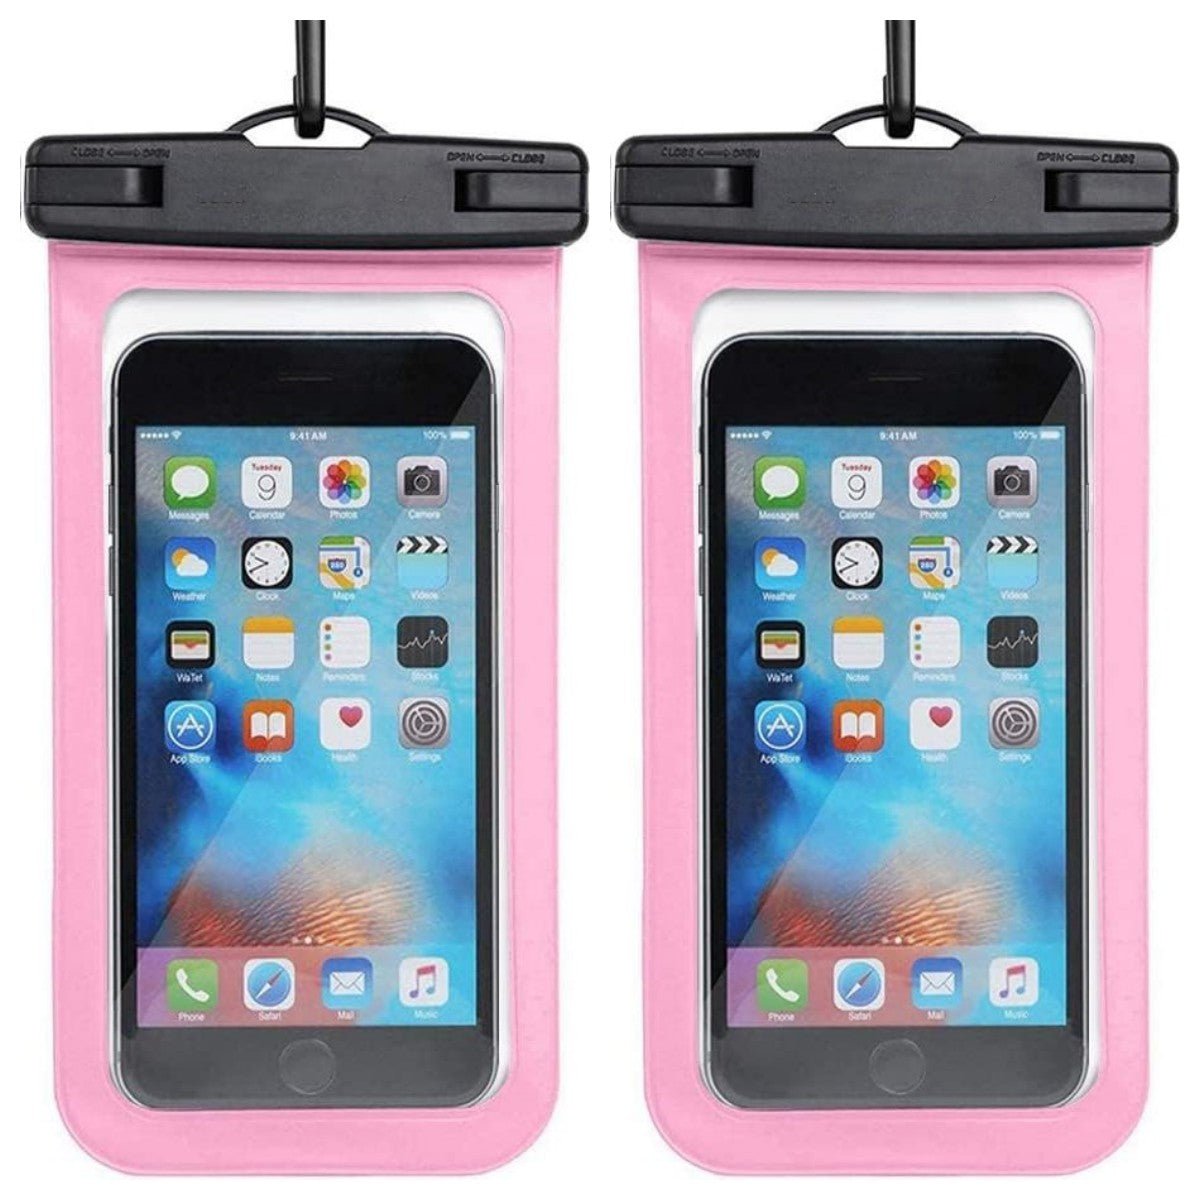 Waterproof Phone Pouch, Universal Case Compatible for iPhone 15 14 13 12 Pro Max Plus Up to 8.3", IPX8 Beach Travel Essentials-Black-2 Pack - QGeeM